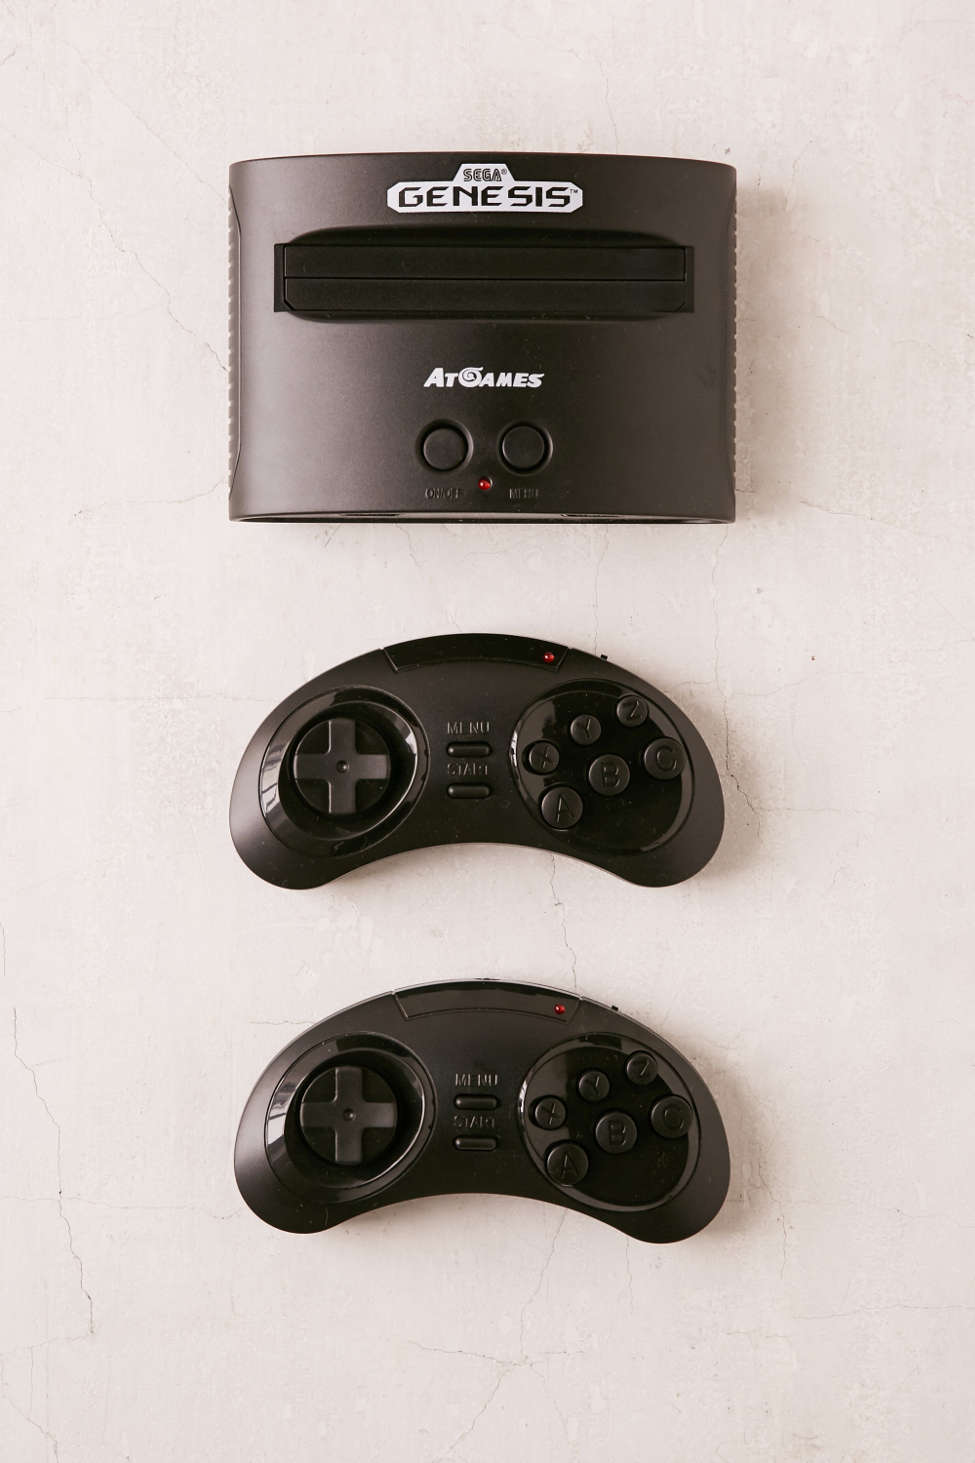 Sega Genesis game system and two conrollers